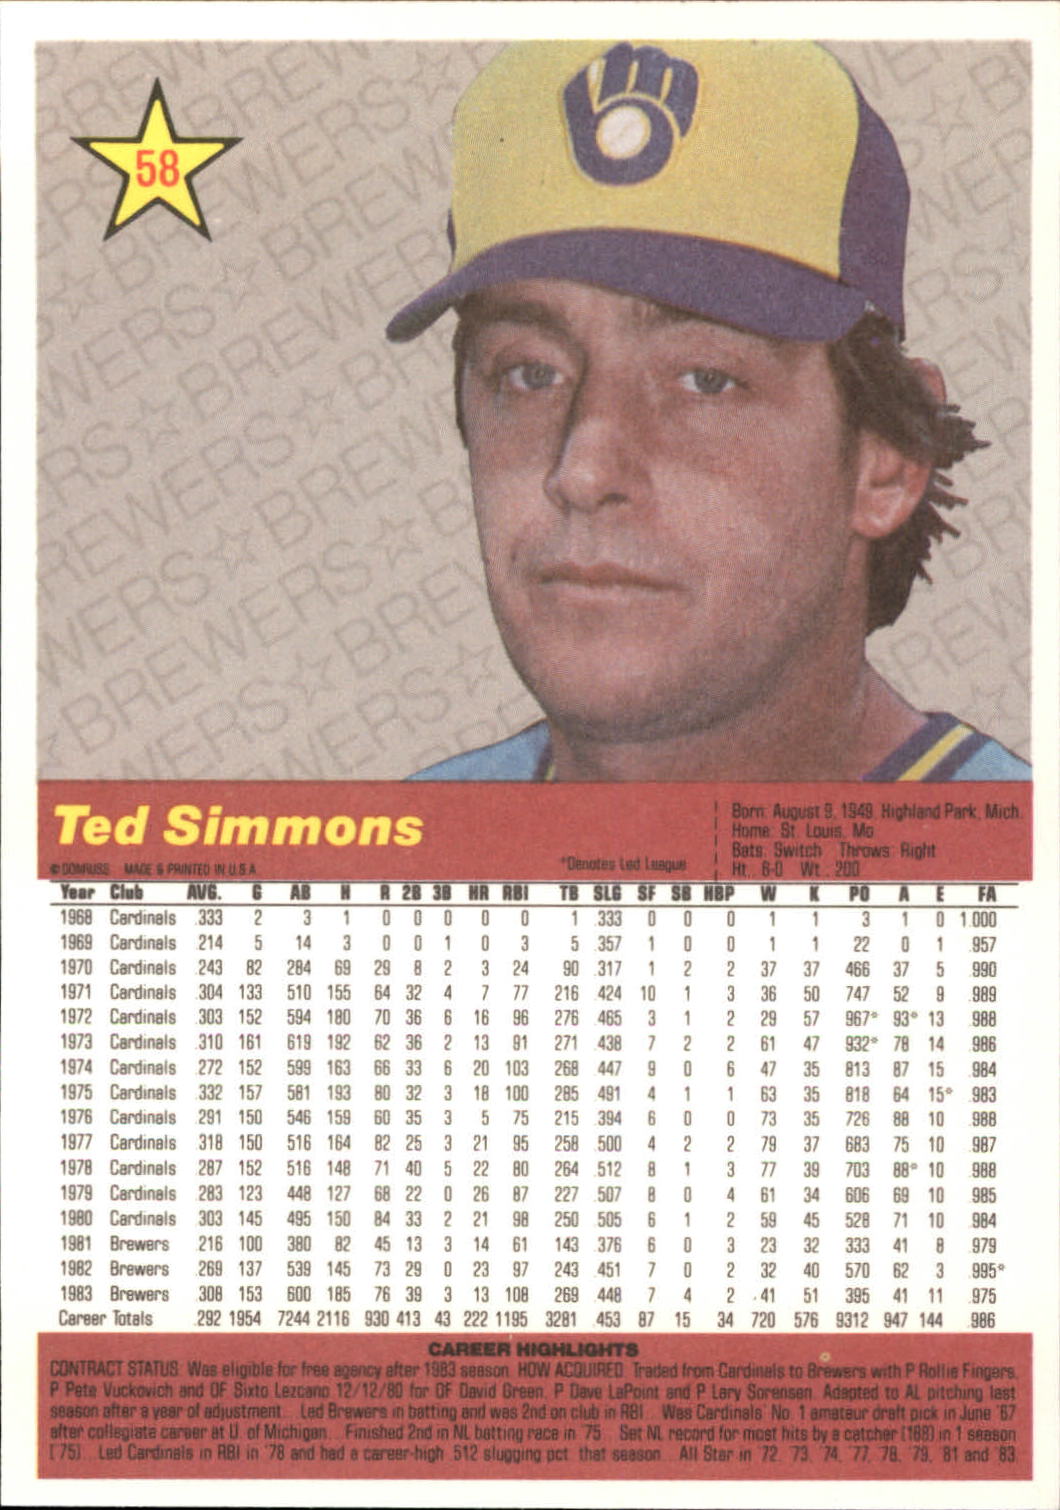 1984 Donruss Action All-Stars #58 Ted Simmons back image